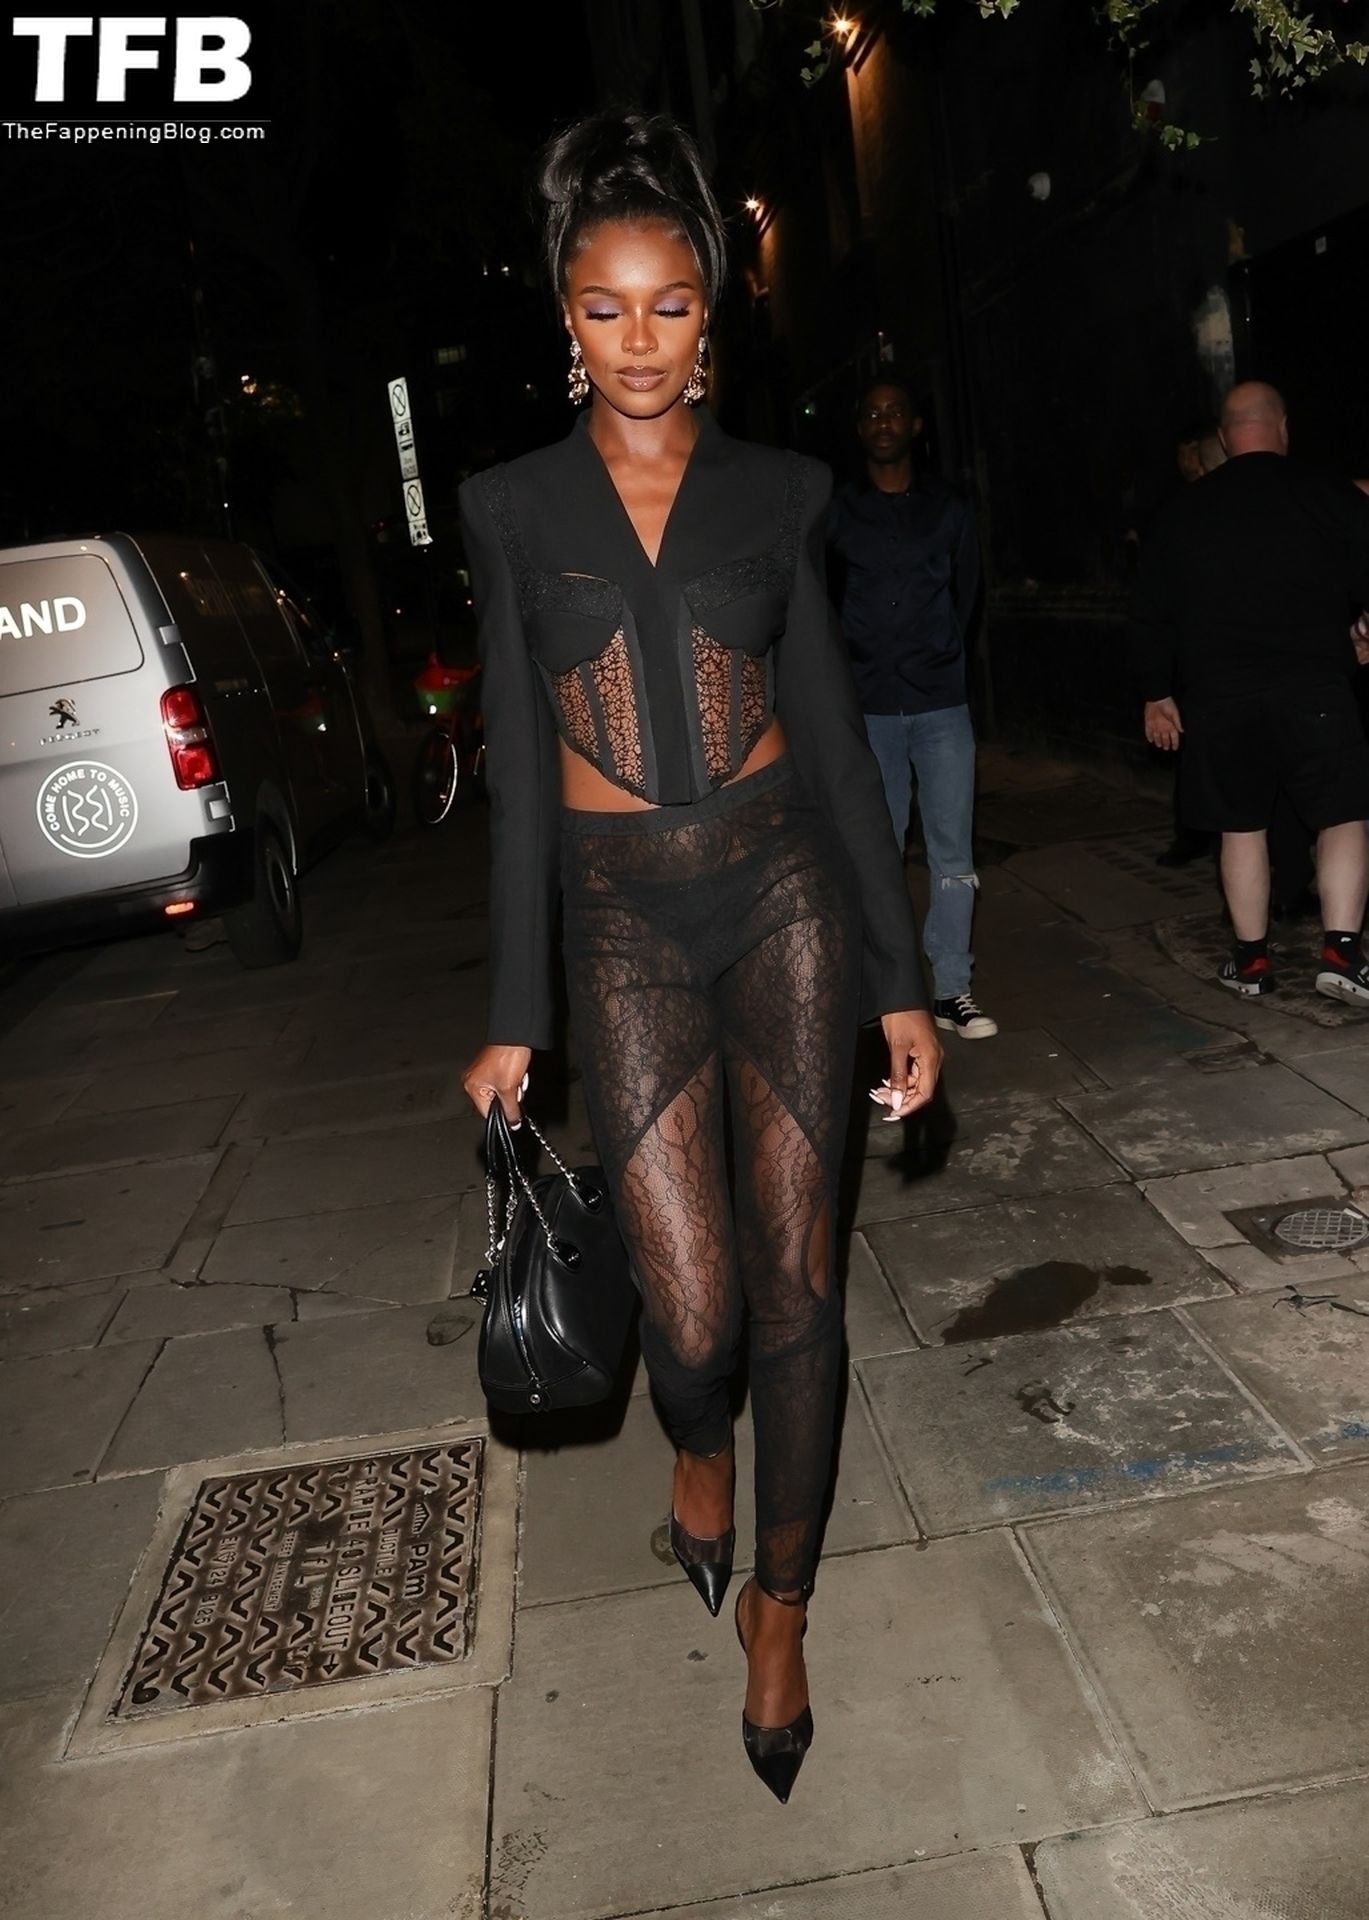 Leomie-Anderson-See-Through-The-Fappening-Blog-8.jpg